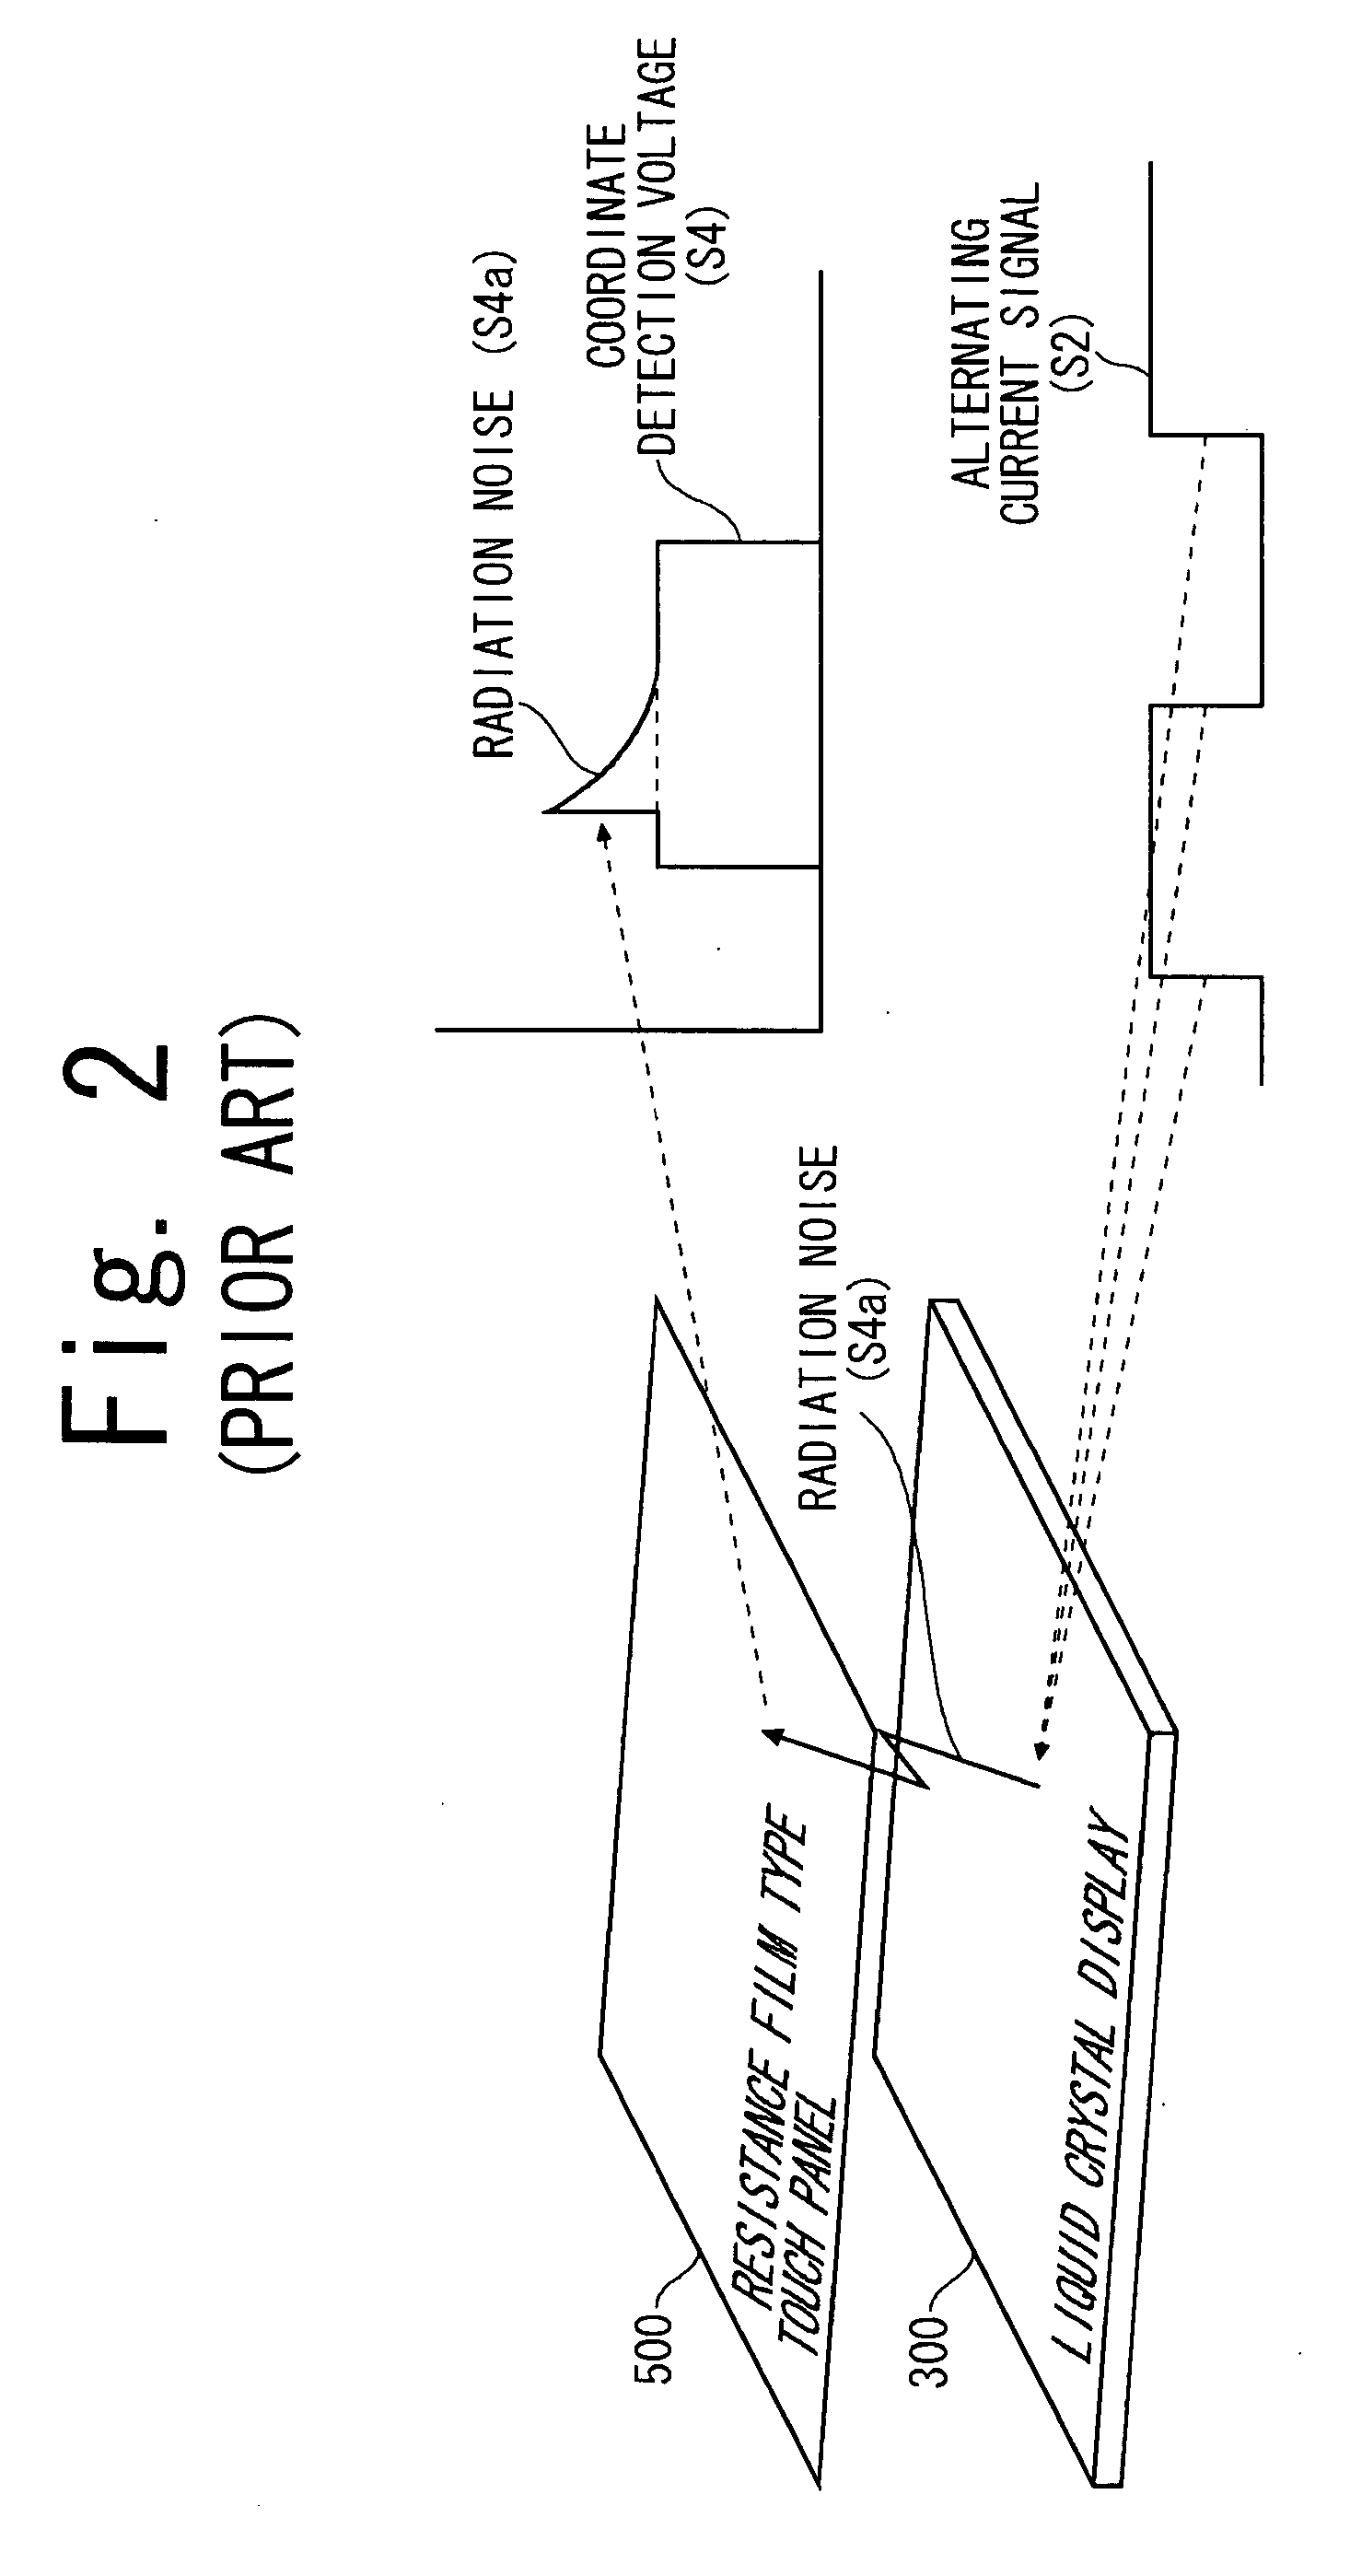 Information processing apparatus and a method of controlling the same